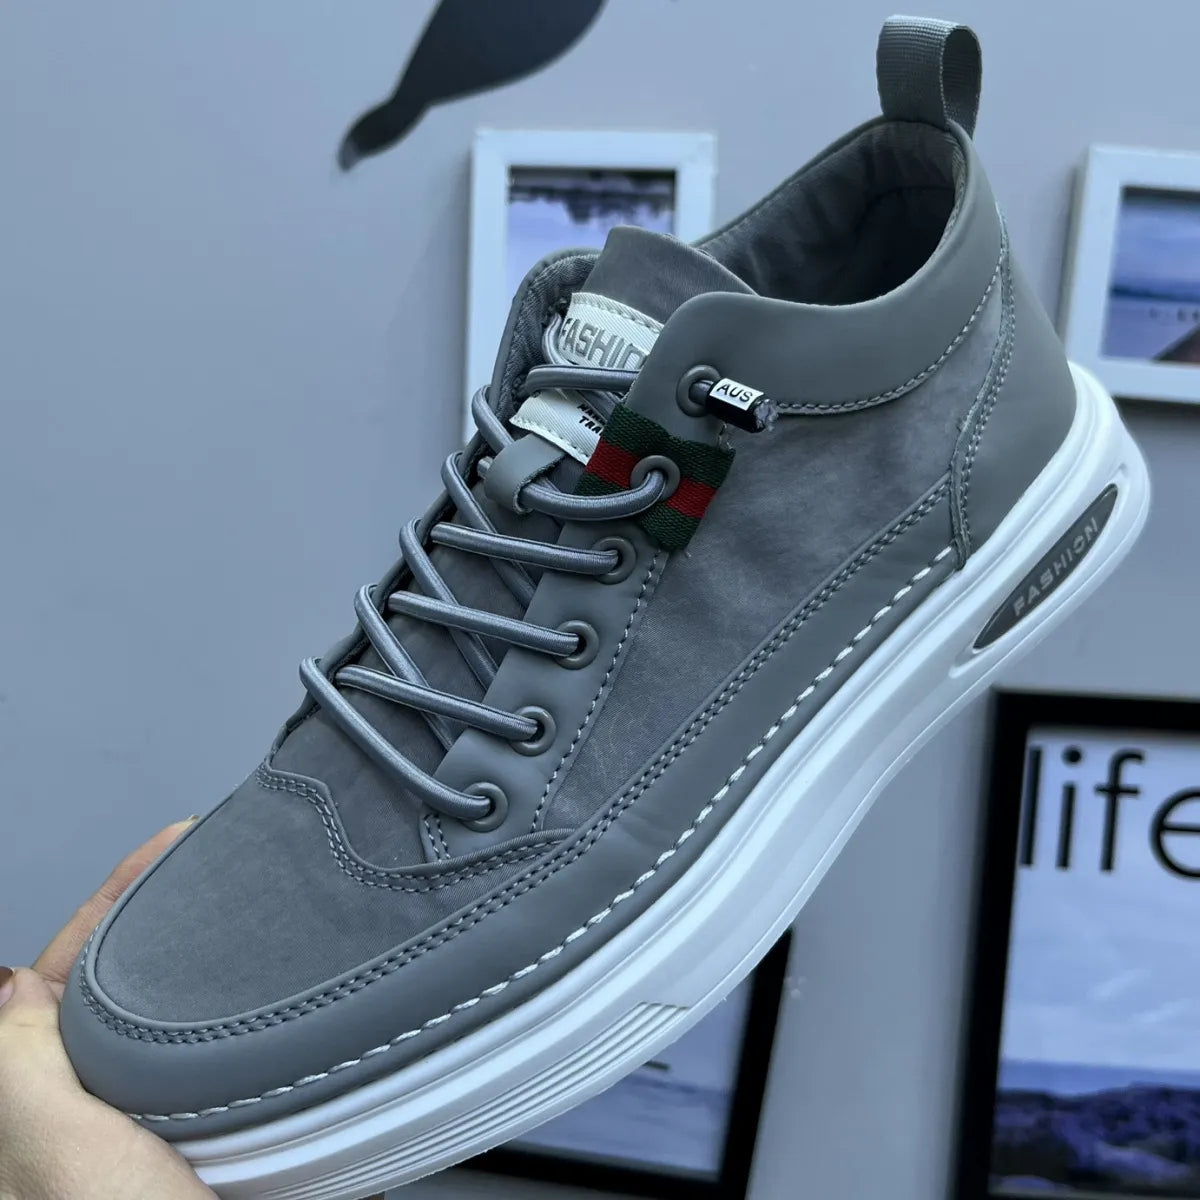 ⏰Last Day Promotion 55% OFF - Men's summer fashion breathable casual shoes